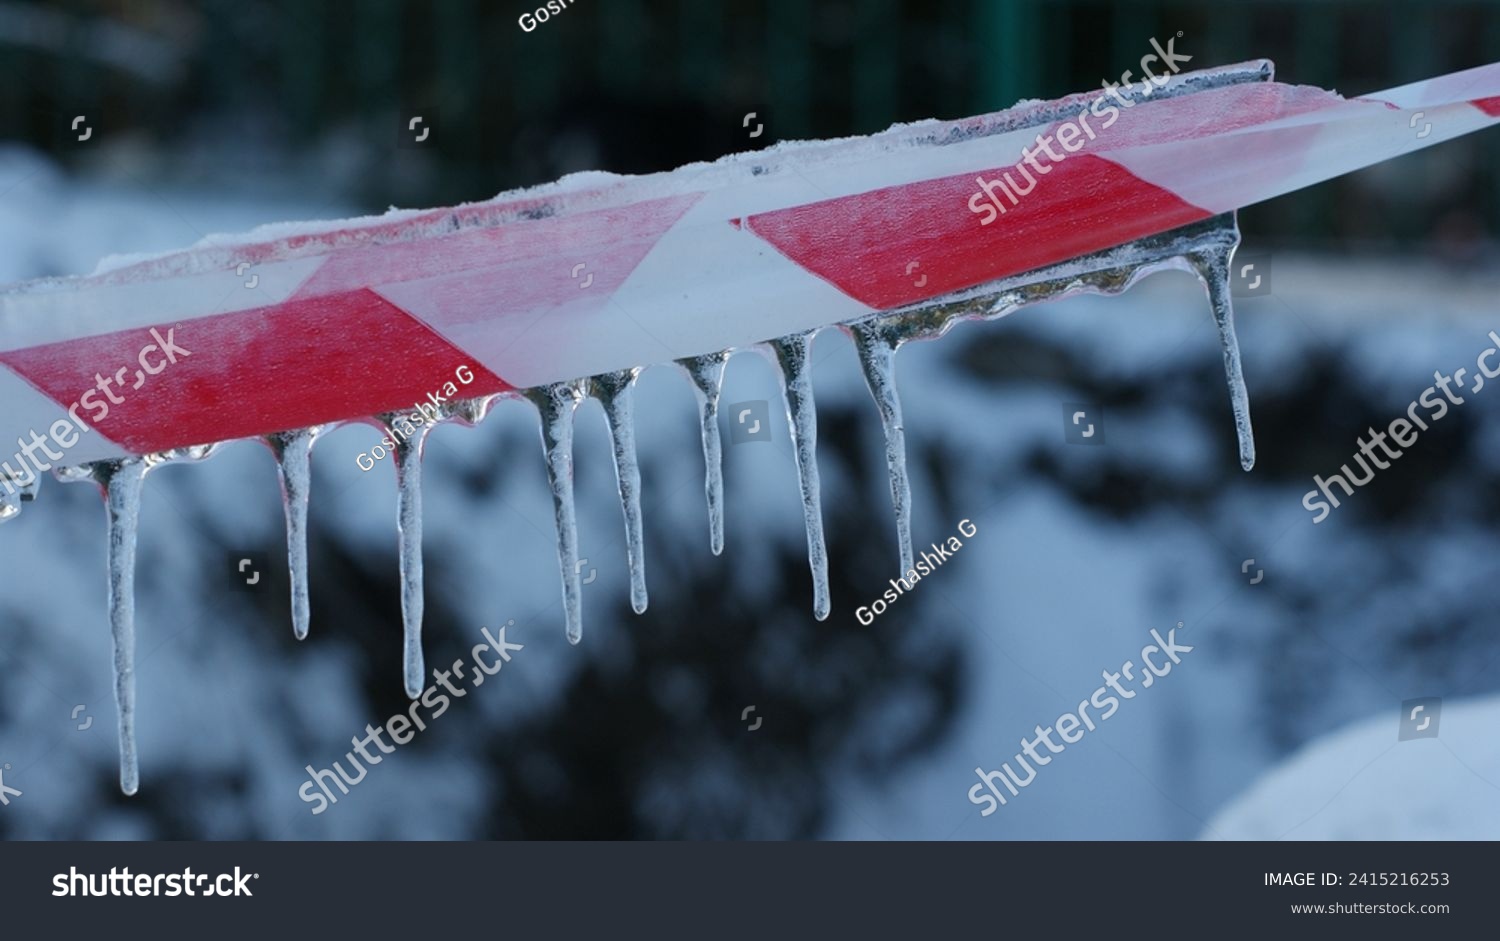 Caution tape, covered in snow and icicles. The tape is stretched horizontally, with icicles hanging from its bottom edge against a blurred snowy landscape #2415216253